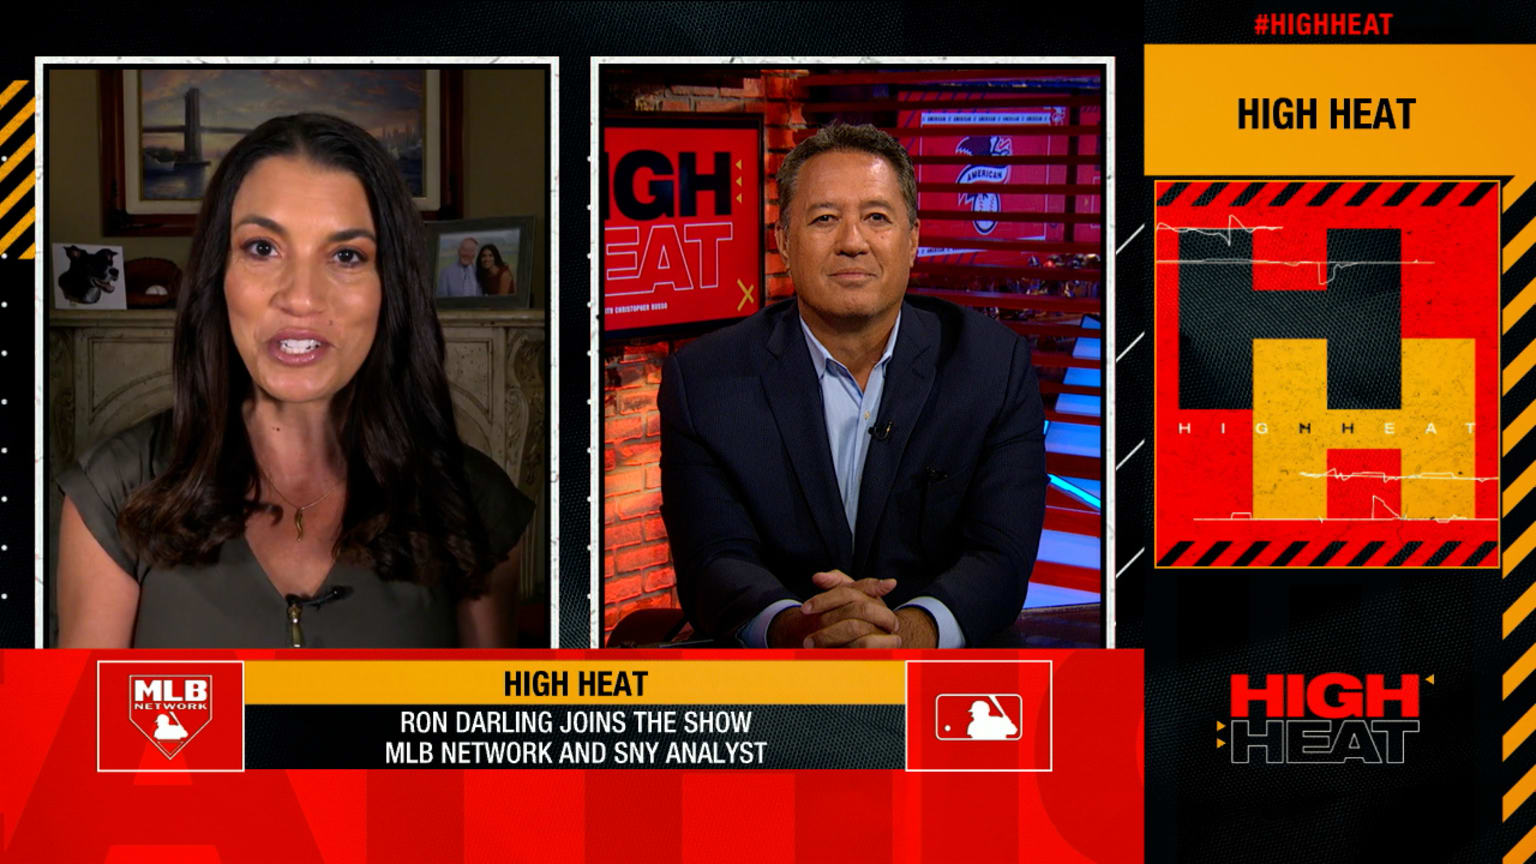 MLB Network - Congratulations to our guy Ron Darling! The